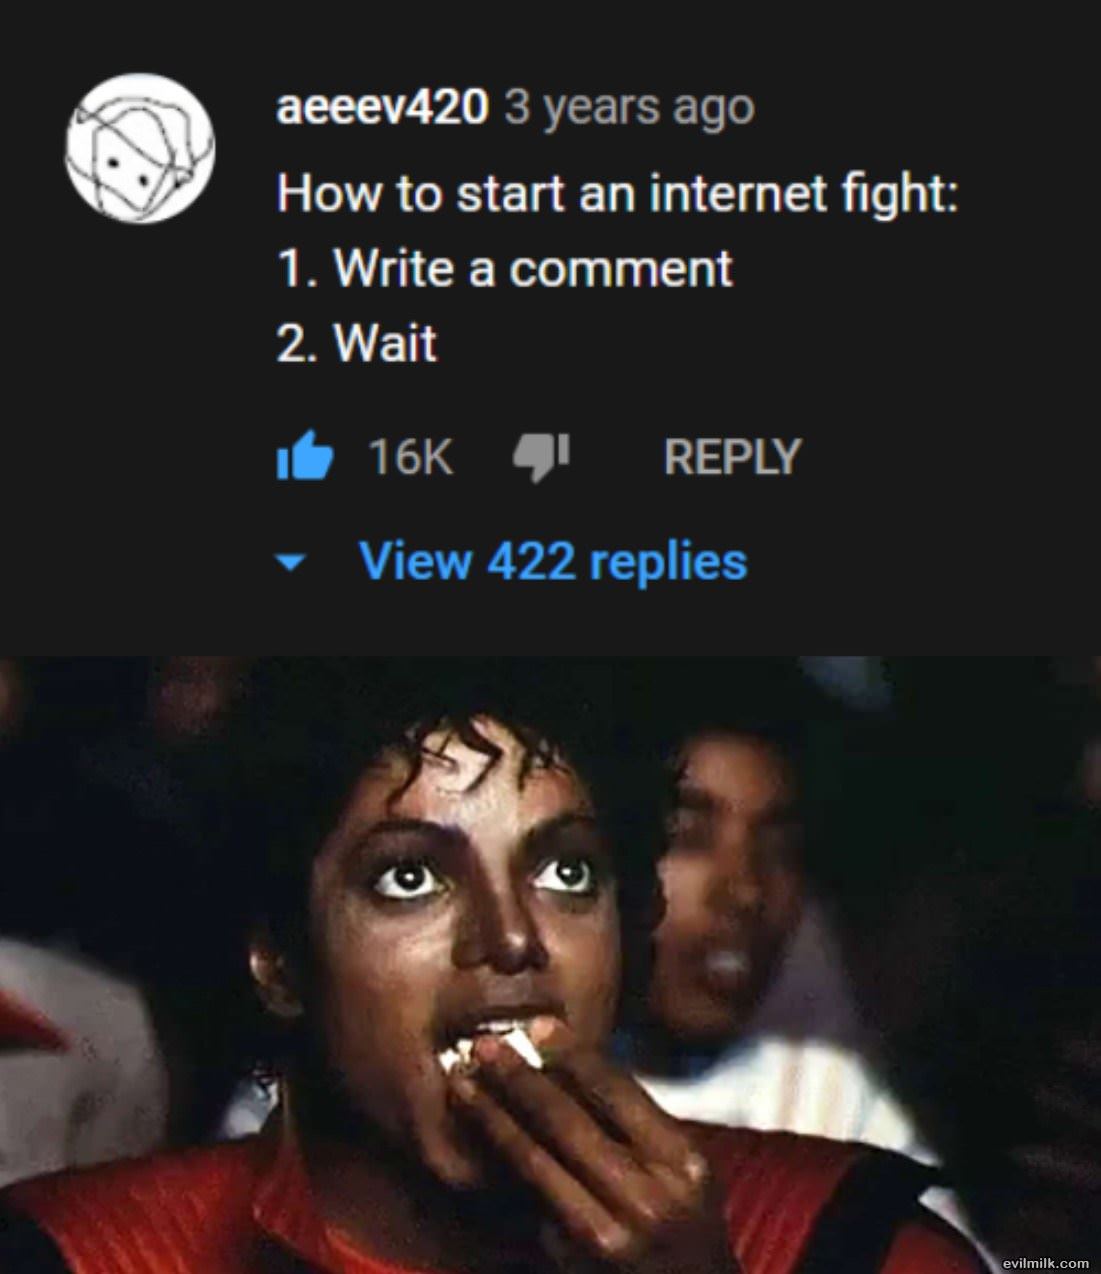 How To Start An Internet Fight